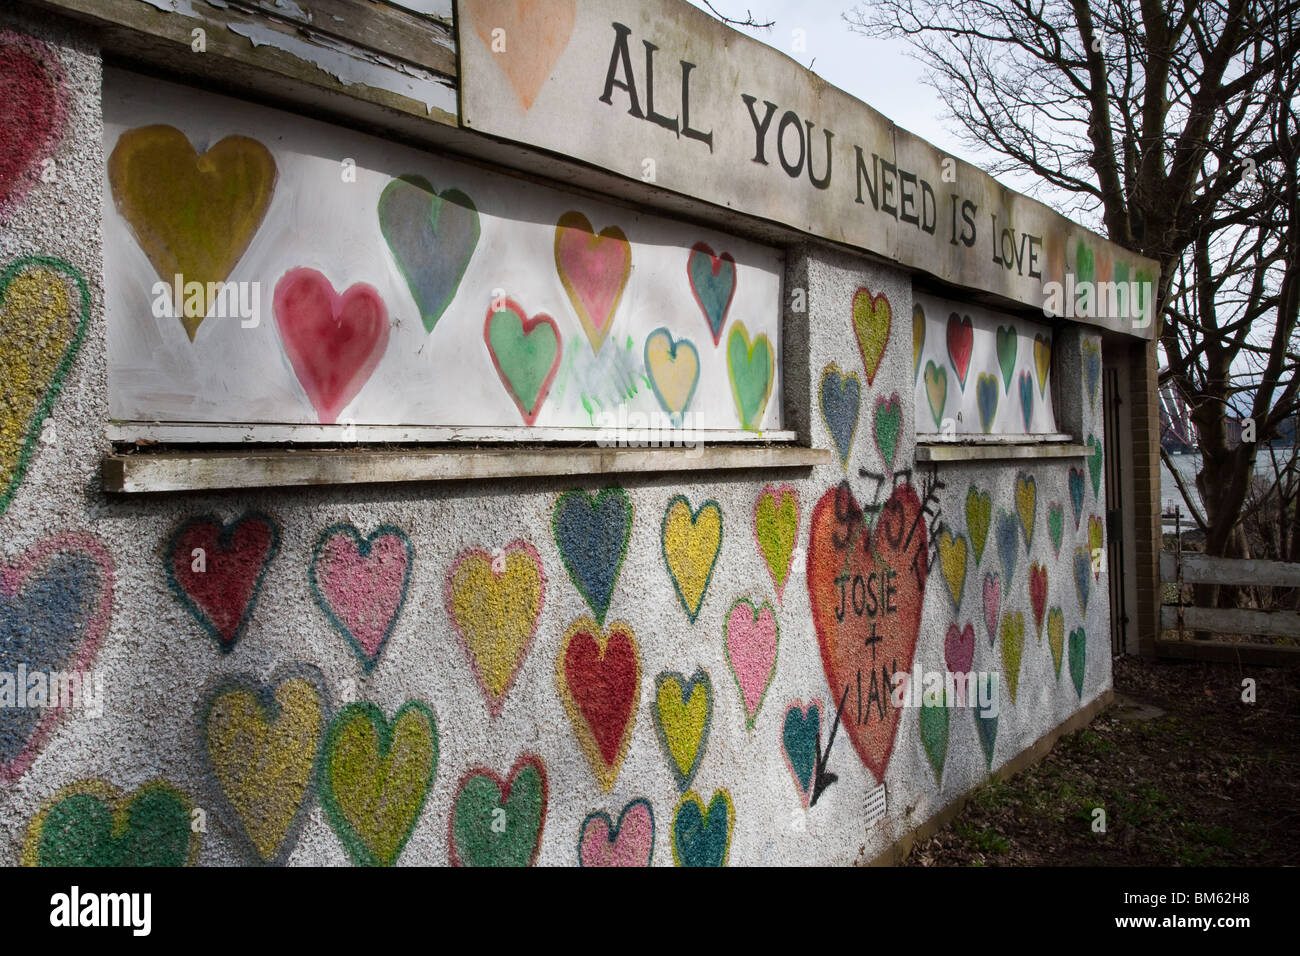 Graffitied wall painted with hearts, shape and designs, South Queensferry, Scotland, UK Stock Photo